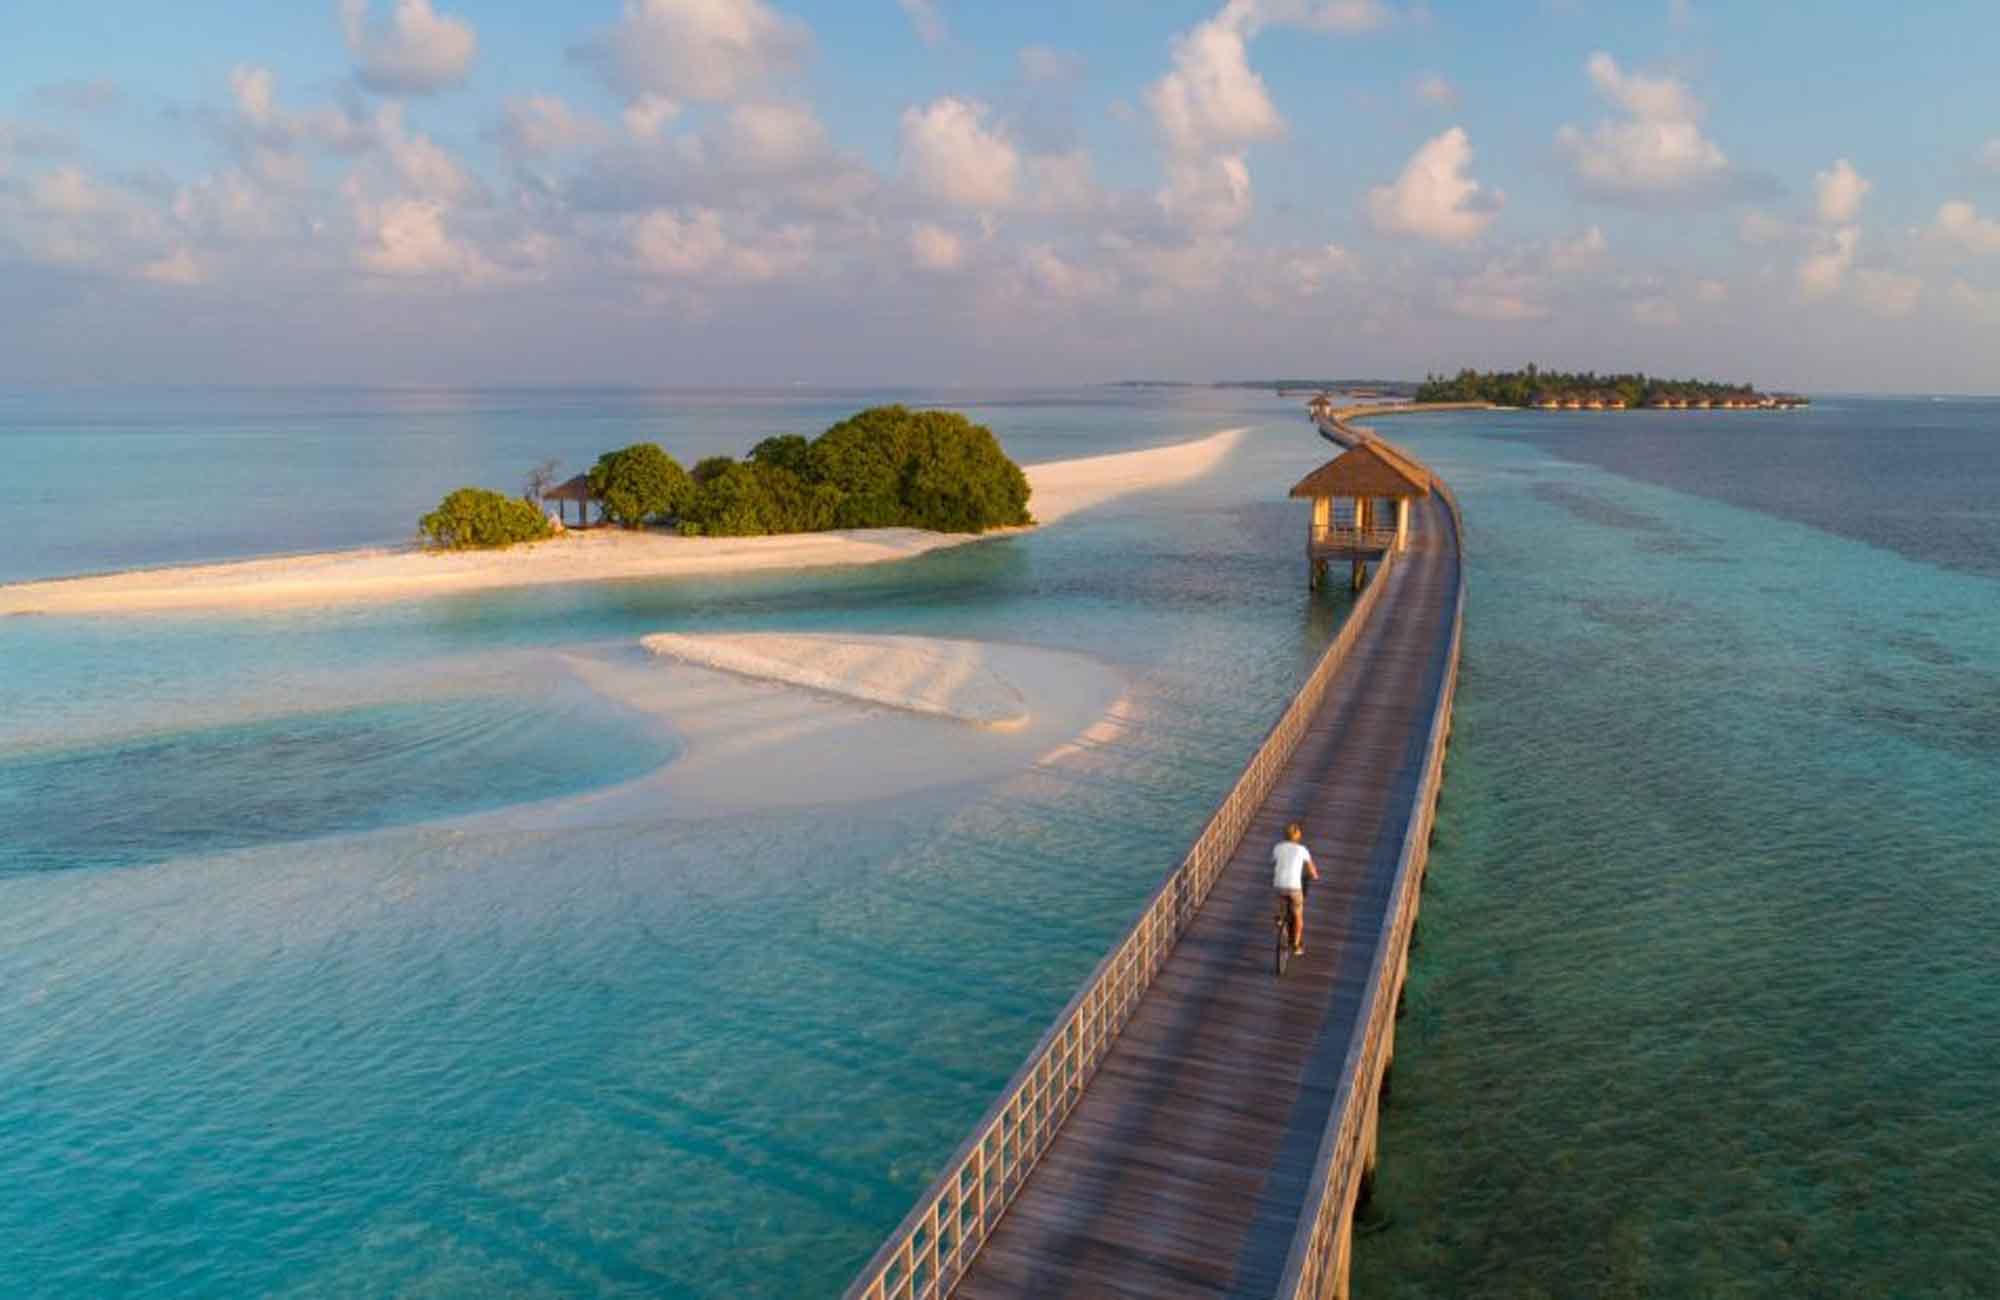 Maldives recorded the highest number of tourist arrivals